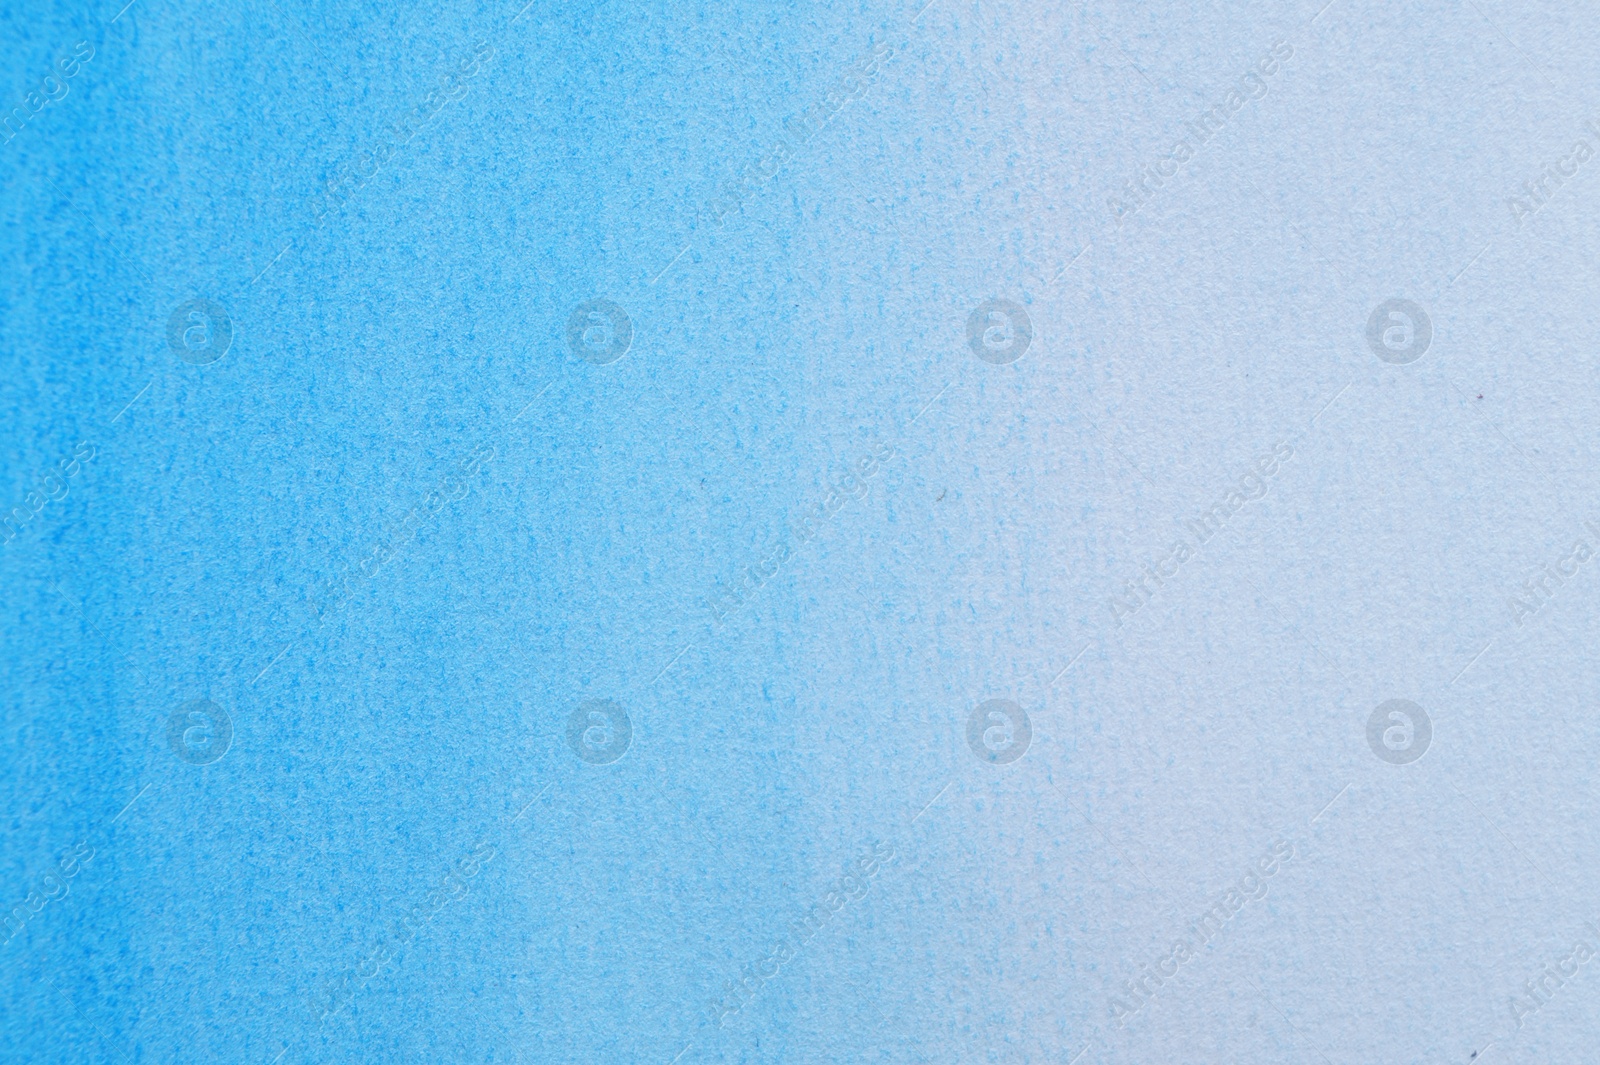 Photo of Abstract light blue watercolor painting as background, top view